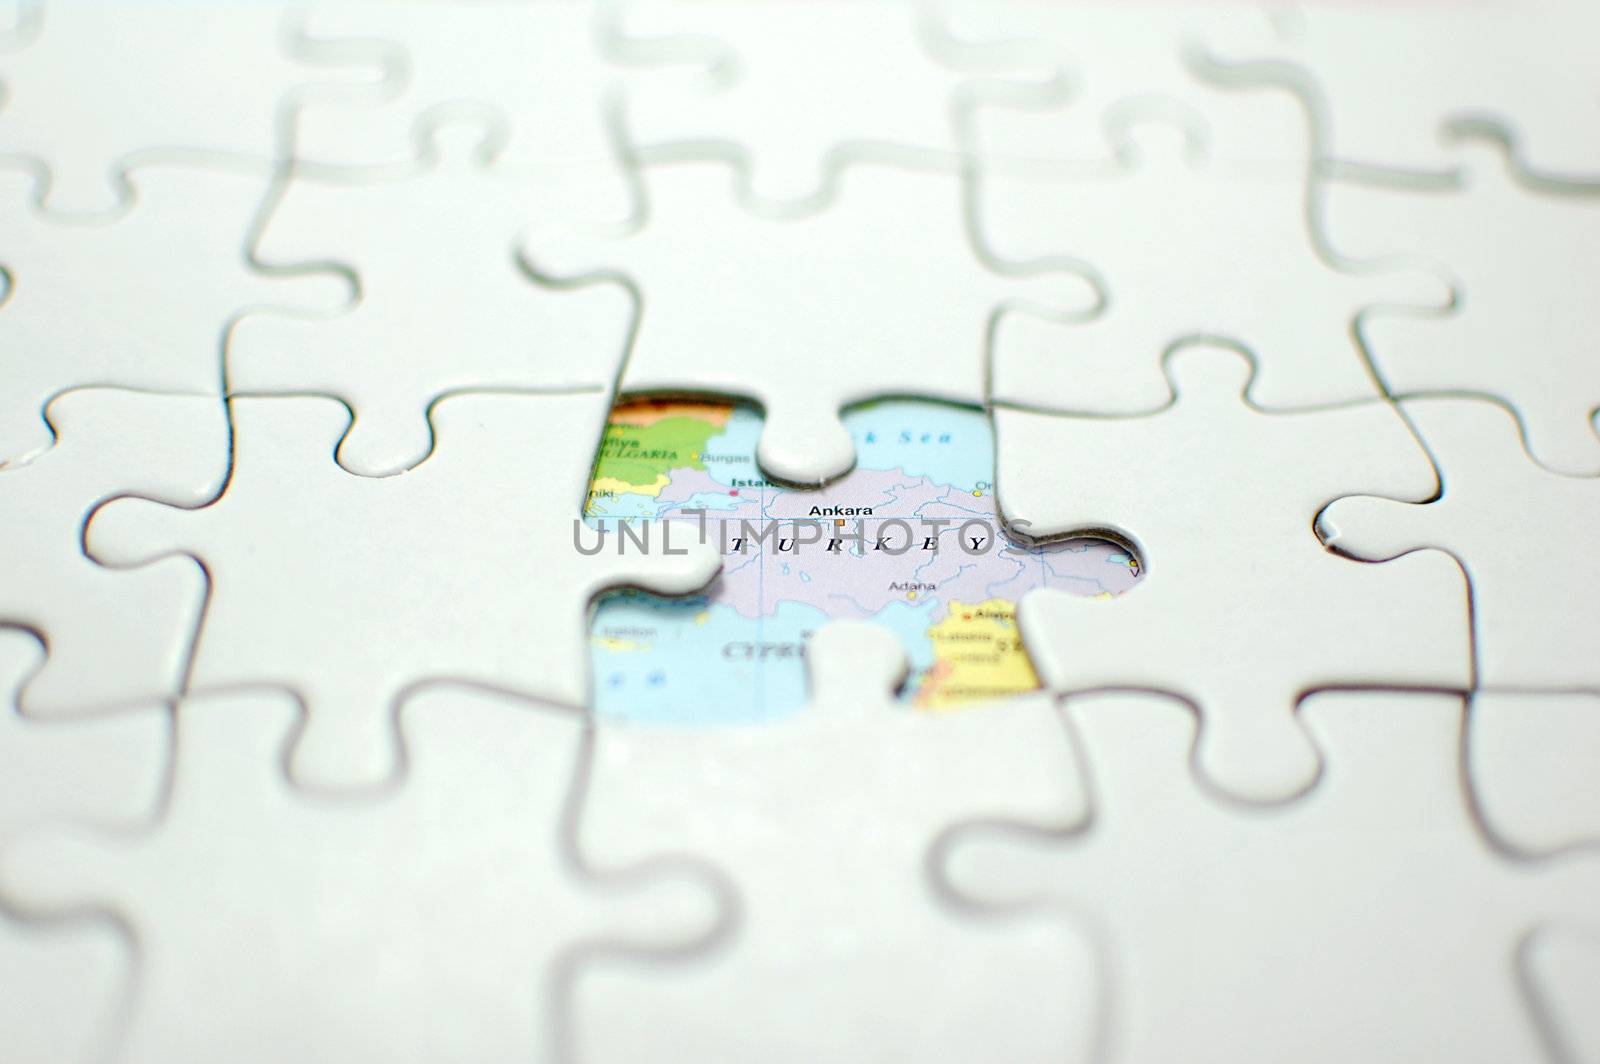 Jigsaw puzzle with missing piece revealing turkey on a map (shallow depth of field)